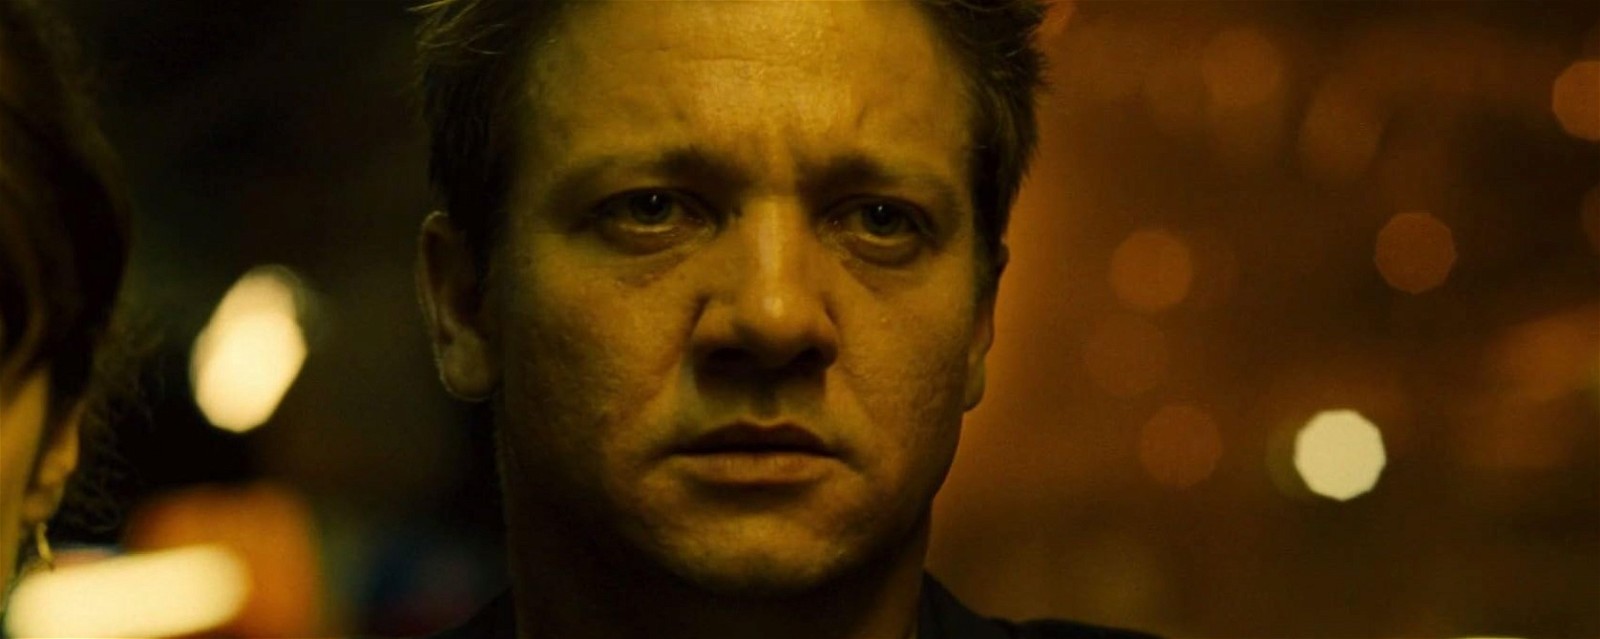 Jeremy Renner in The Bourne Legacy (2012)